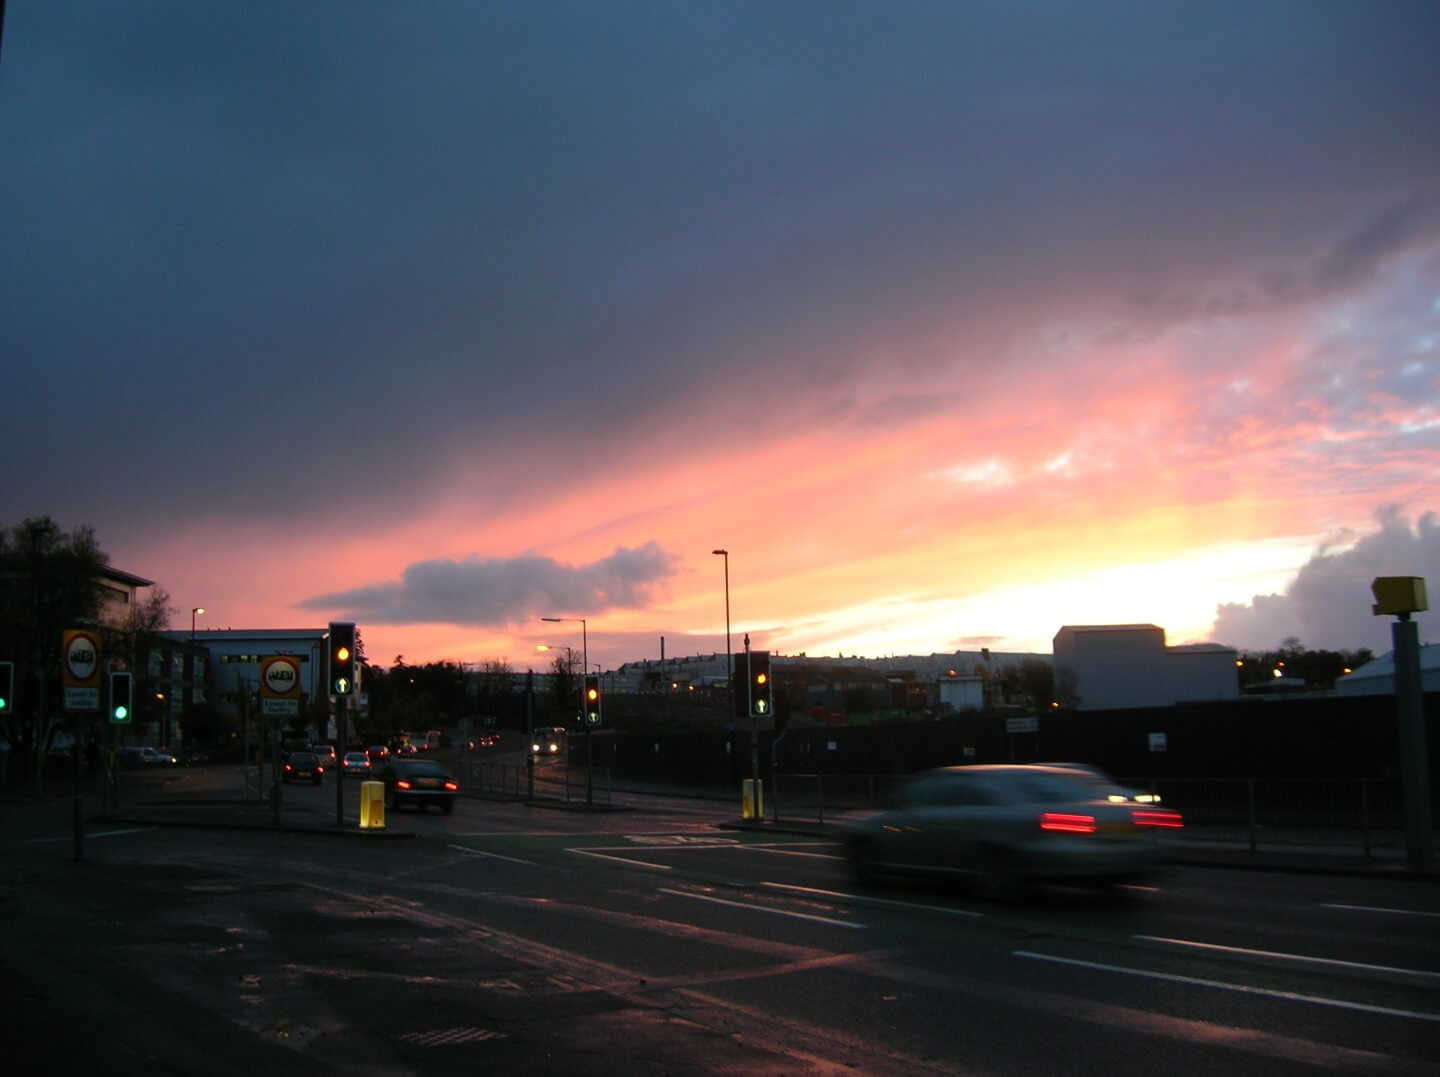 Student Accommodation in Filton, Bristol - sunset over a street in Filton